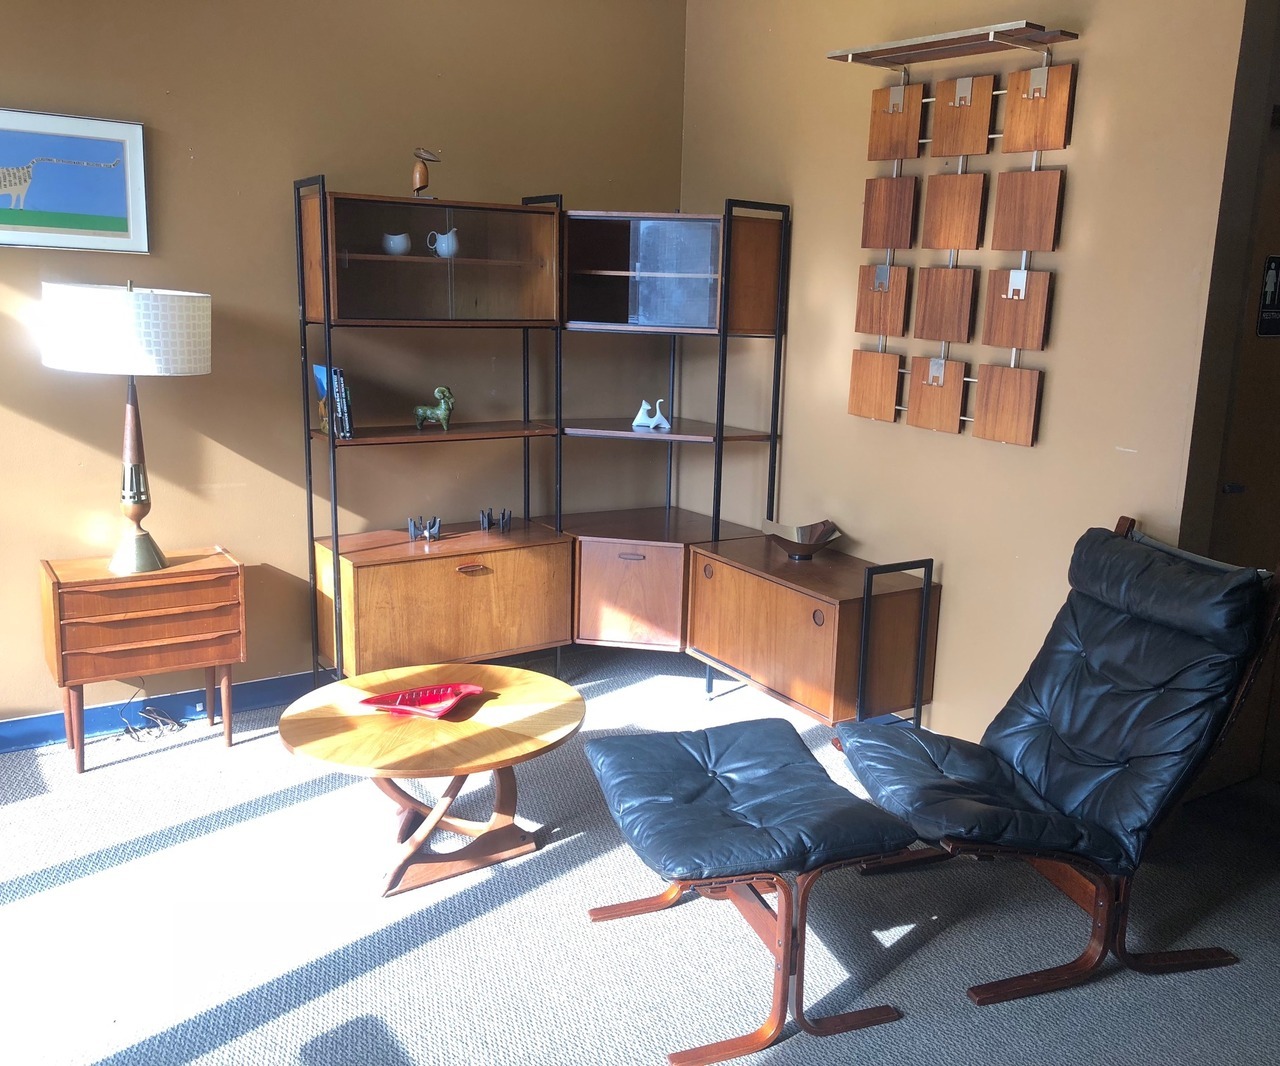 <p>Many countries have stunning mid century furniture. Five nations represented in this photo.</p><p>Tony Paul lamp, USA. Small dresser and Georg Jensen coffee table, Denmark. Corner shelf by Avalon, UK. German coat rack. Ingmar Relling chair, Norway.</p>